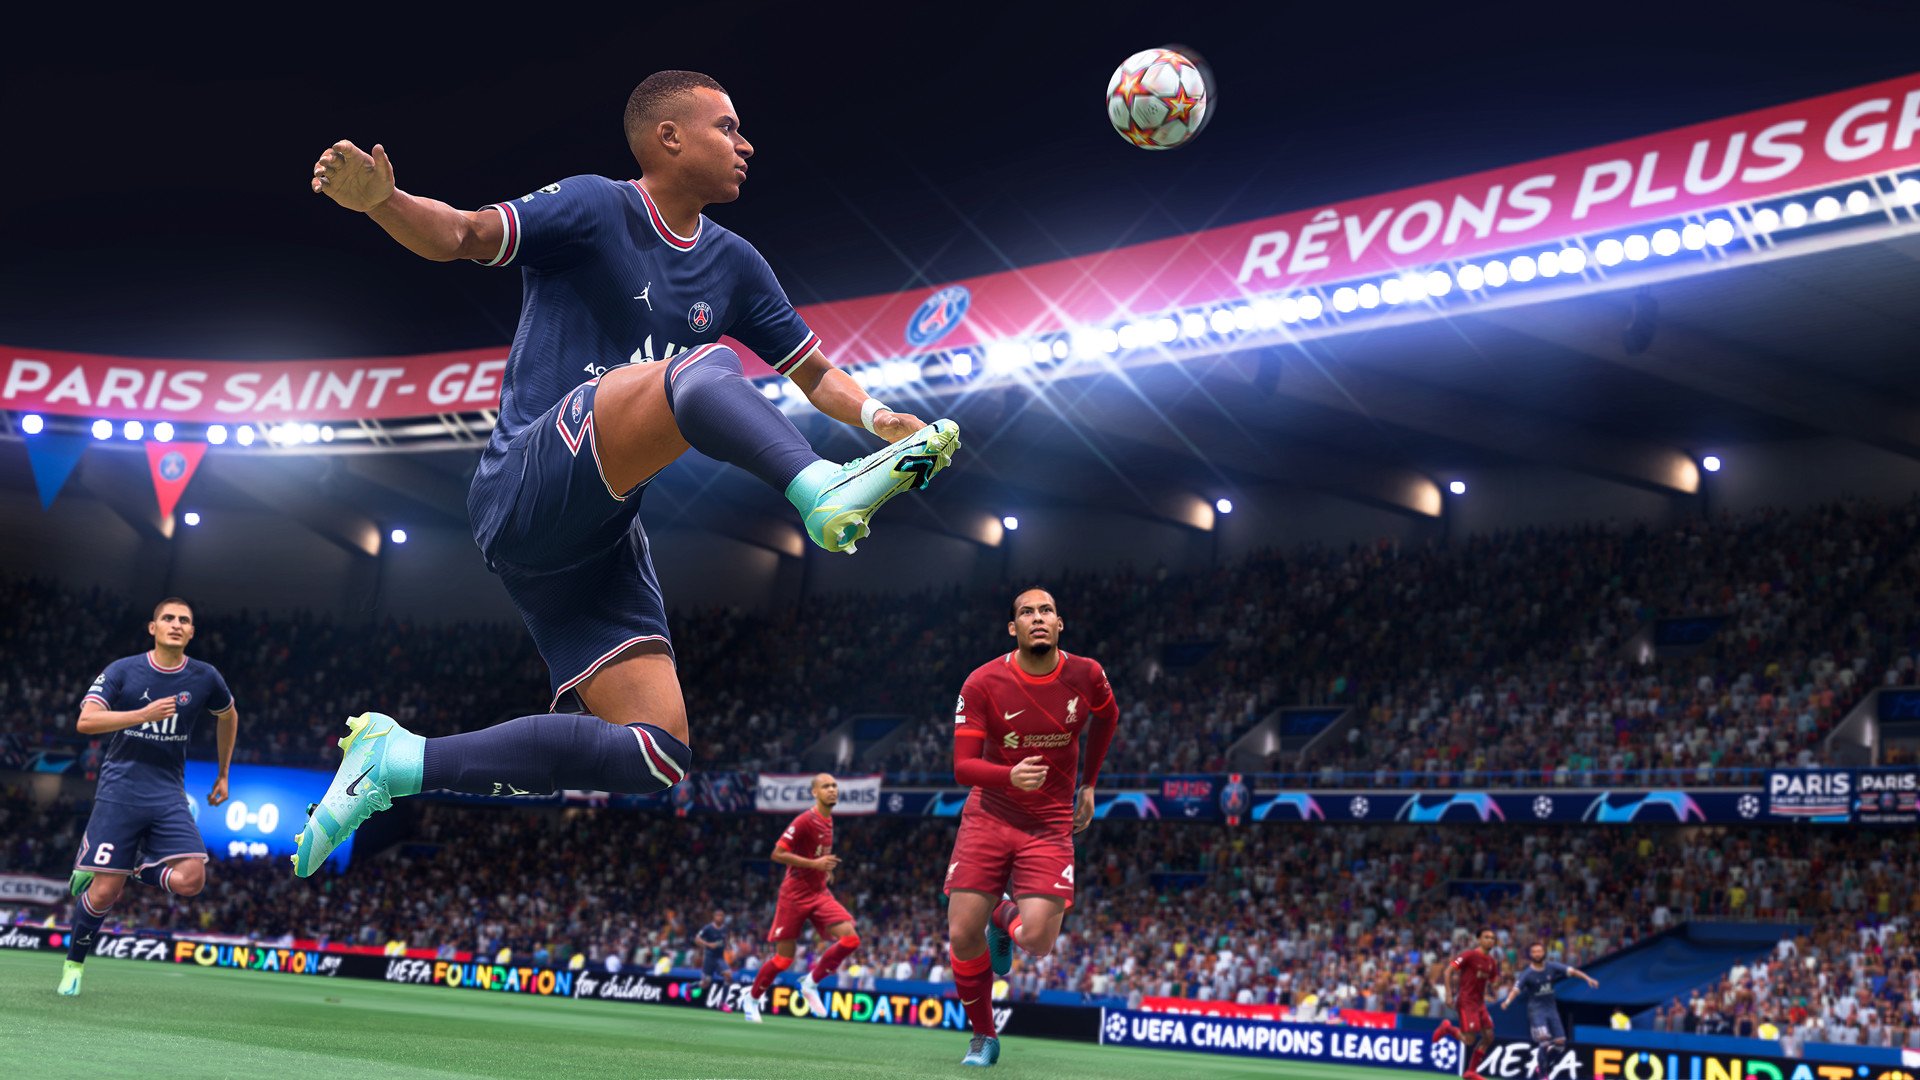 FIFA 22 PC System Requirements 